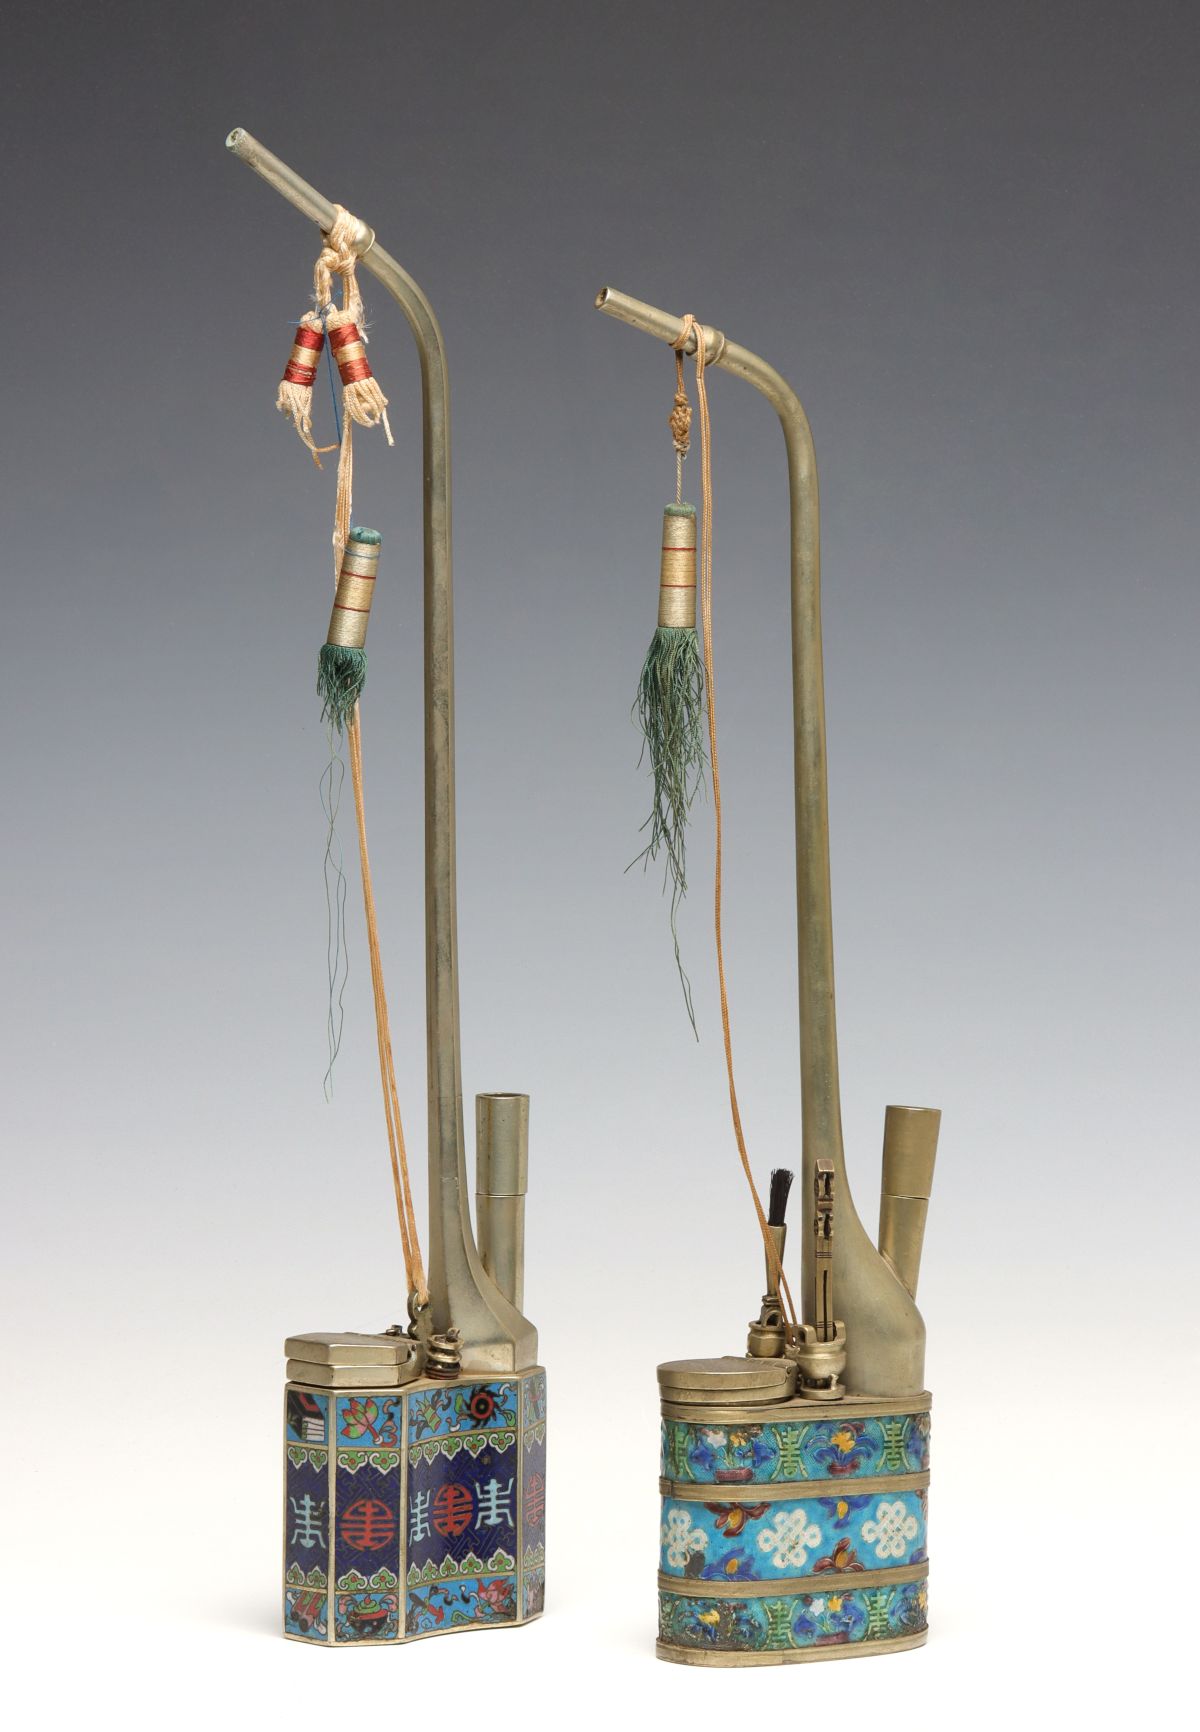 TWO GOOD 19TH C. CHINESE OPIUM PIPES WITH ENAMEL